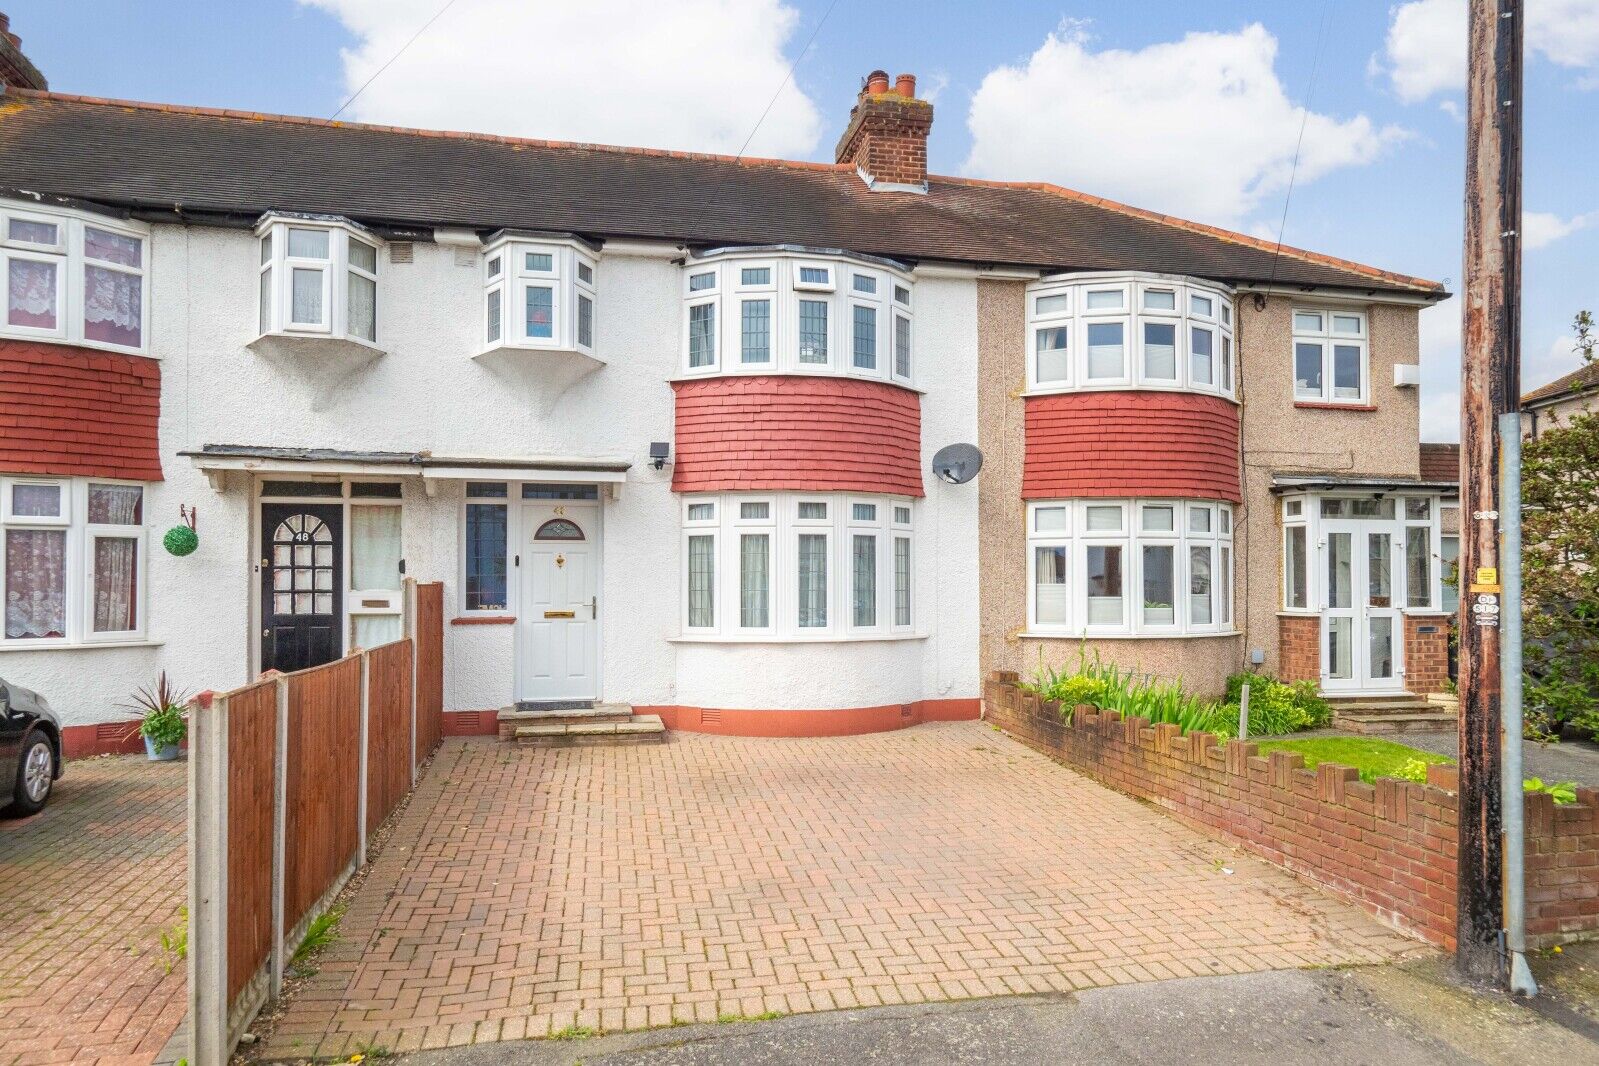 3 bedroom mid terraced house for sale Marlow Drive, Cheam, SM3, main image